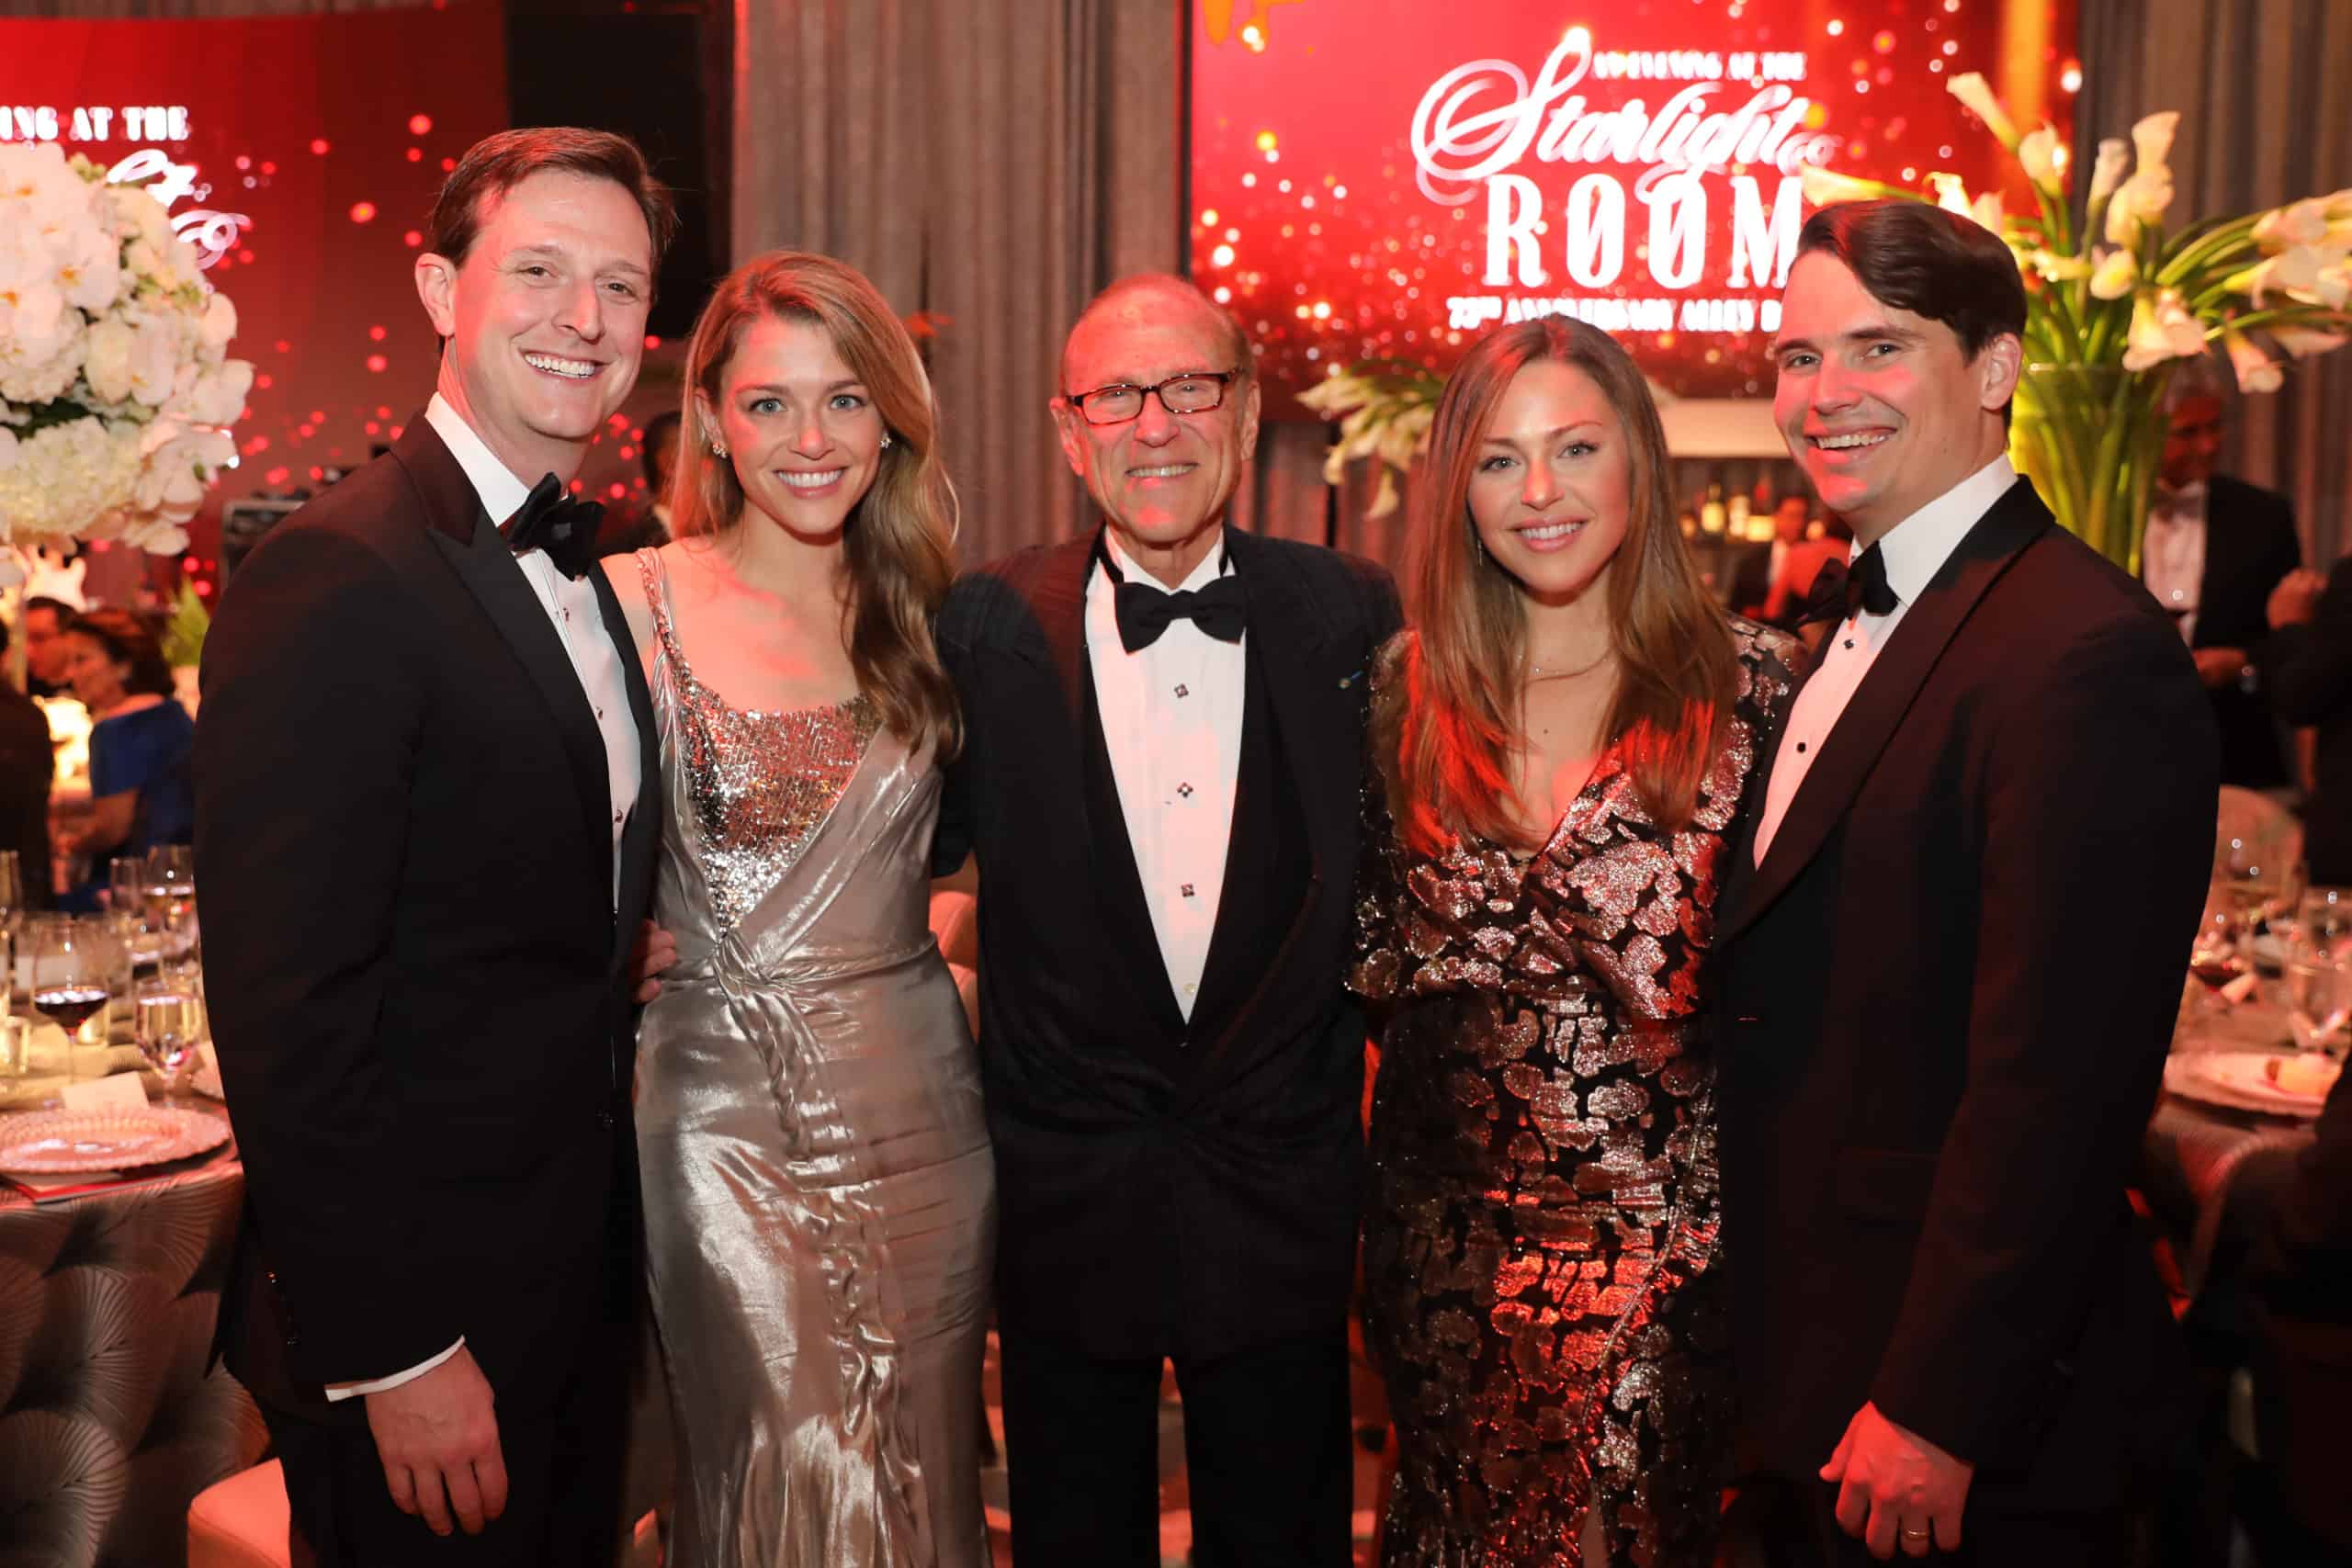 Kevin and Brittany Kushner, Robert Sakowitz with Lexi and Mike Marek